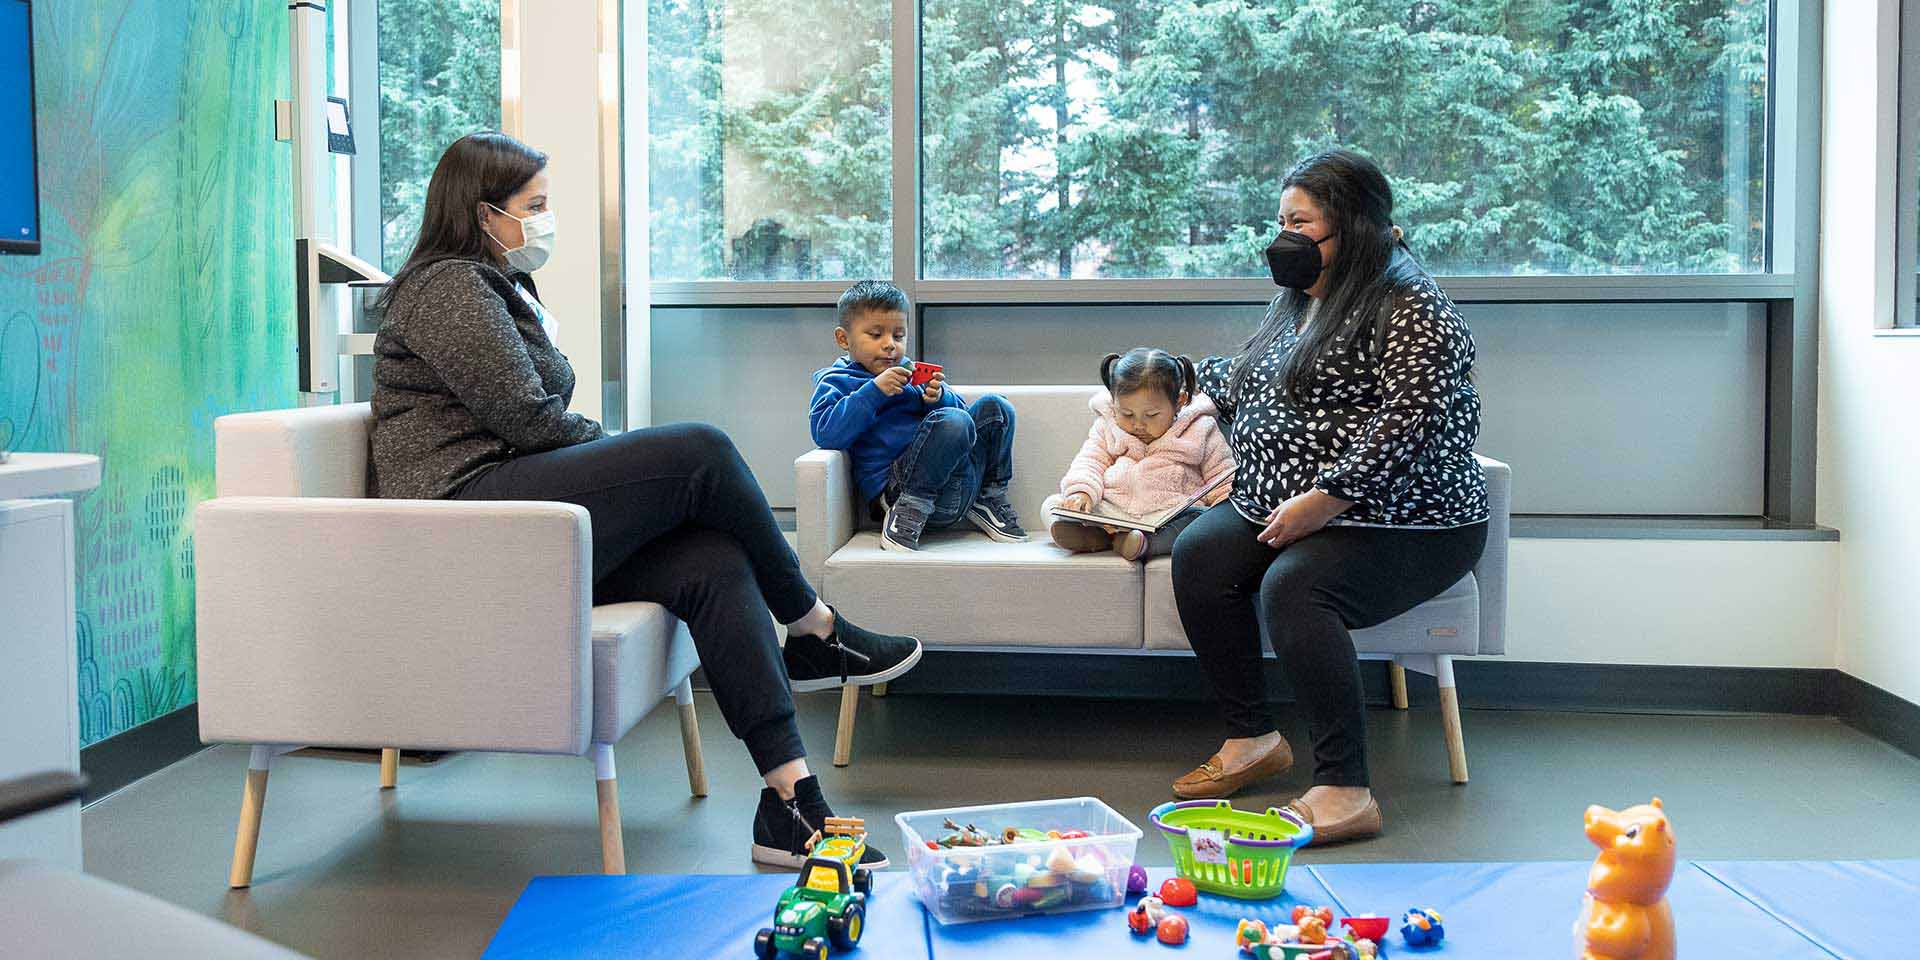 Dr. Minjarez meeting was a mother and her two small children at Seattle Children's Magnuson.